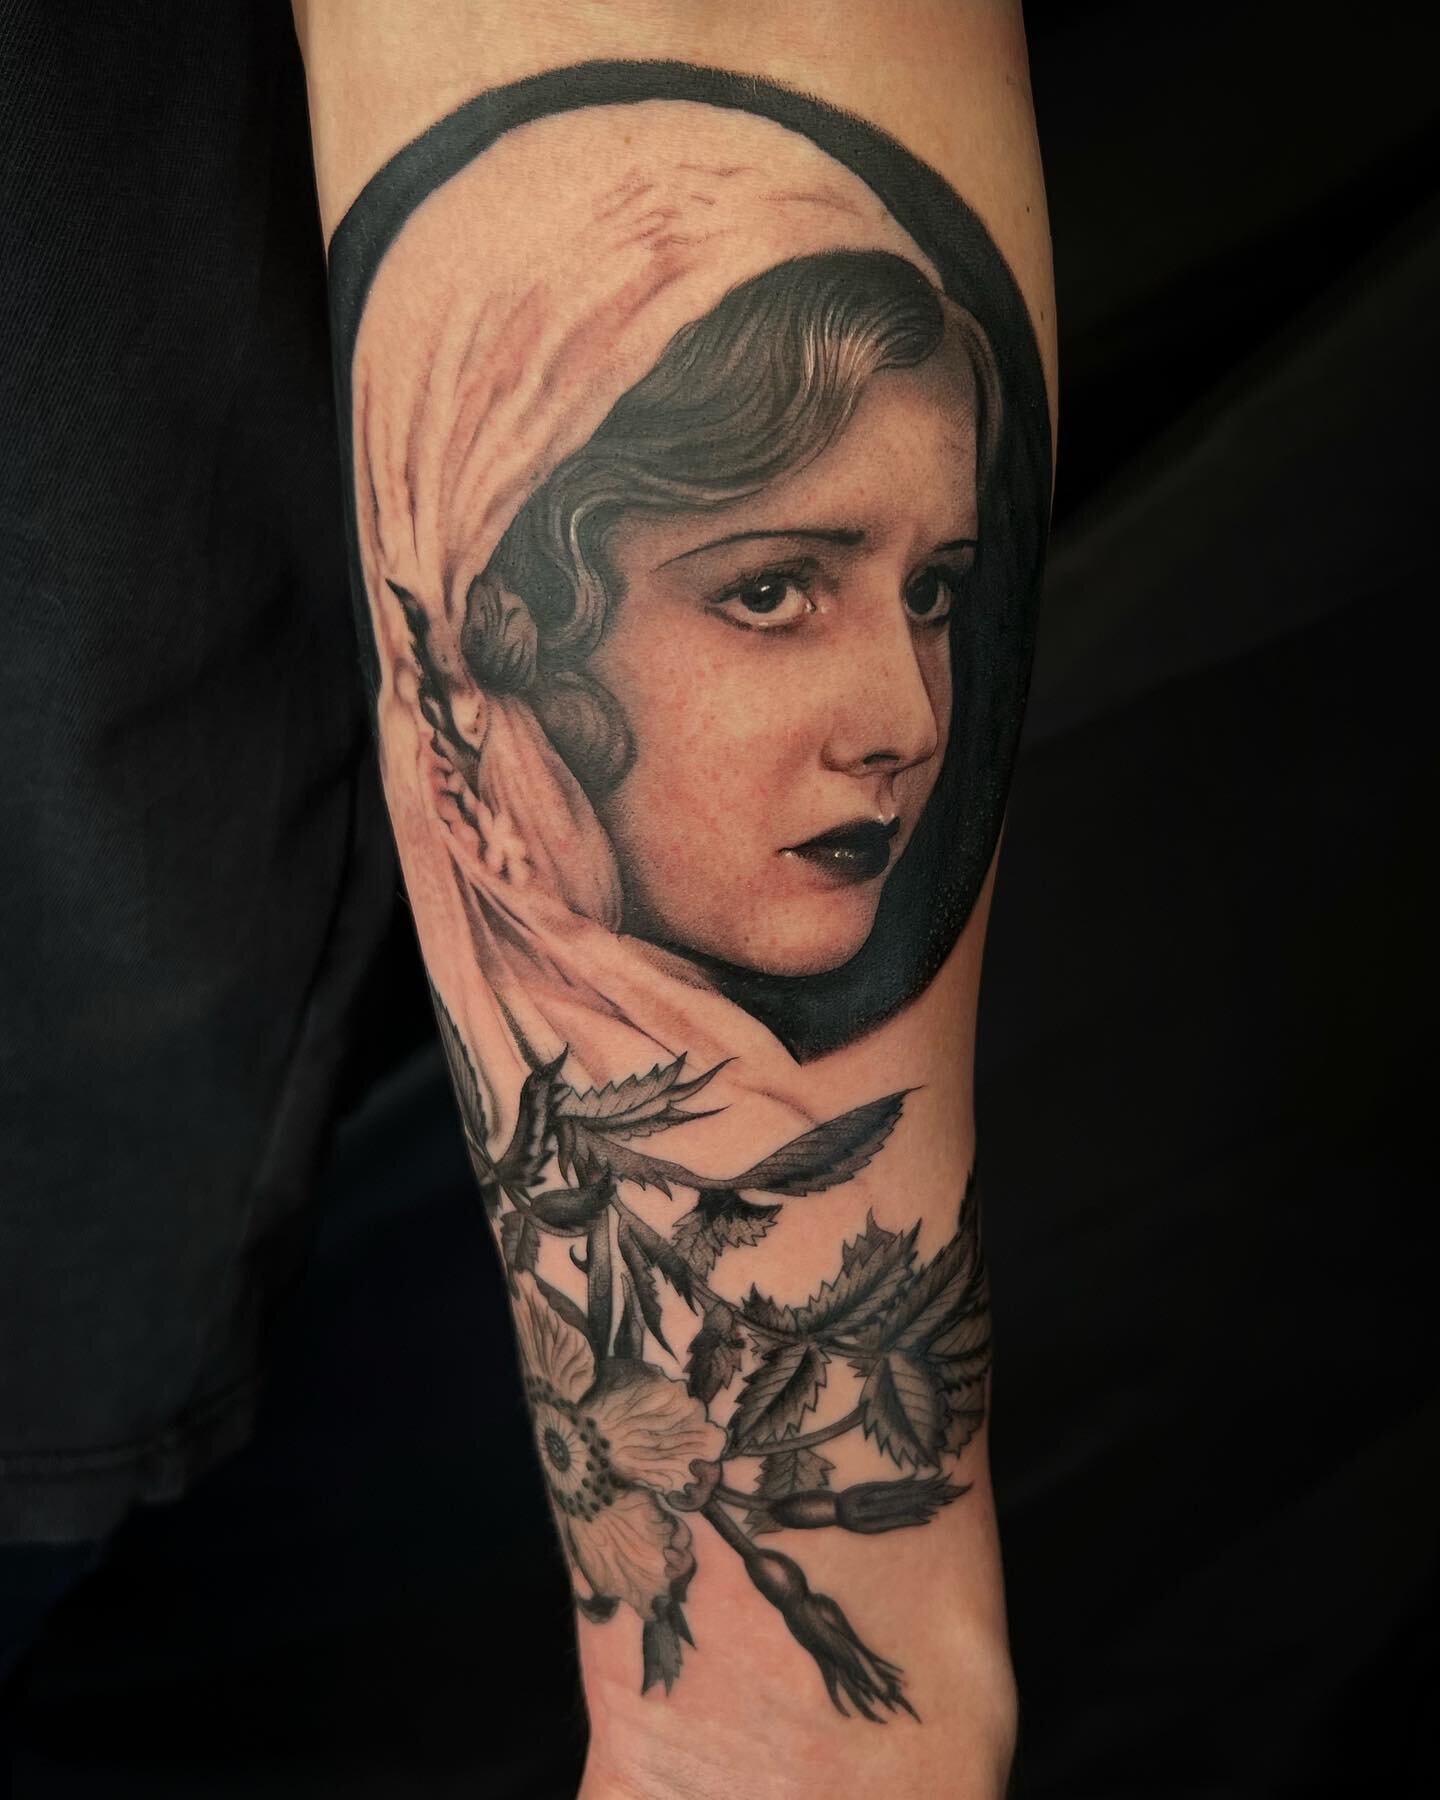 Portrait of Mae Clarke with dog roses on Leo ✨
.
Leo had an amazing collection of tattoos! Some by my favourites @kate_selkie &amp; @treubhan 
.
I love doing black and grey portraits, they may be my favourite tattoos to work on. Please more 🙏🙏
.
I 